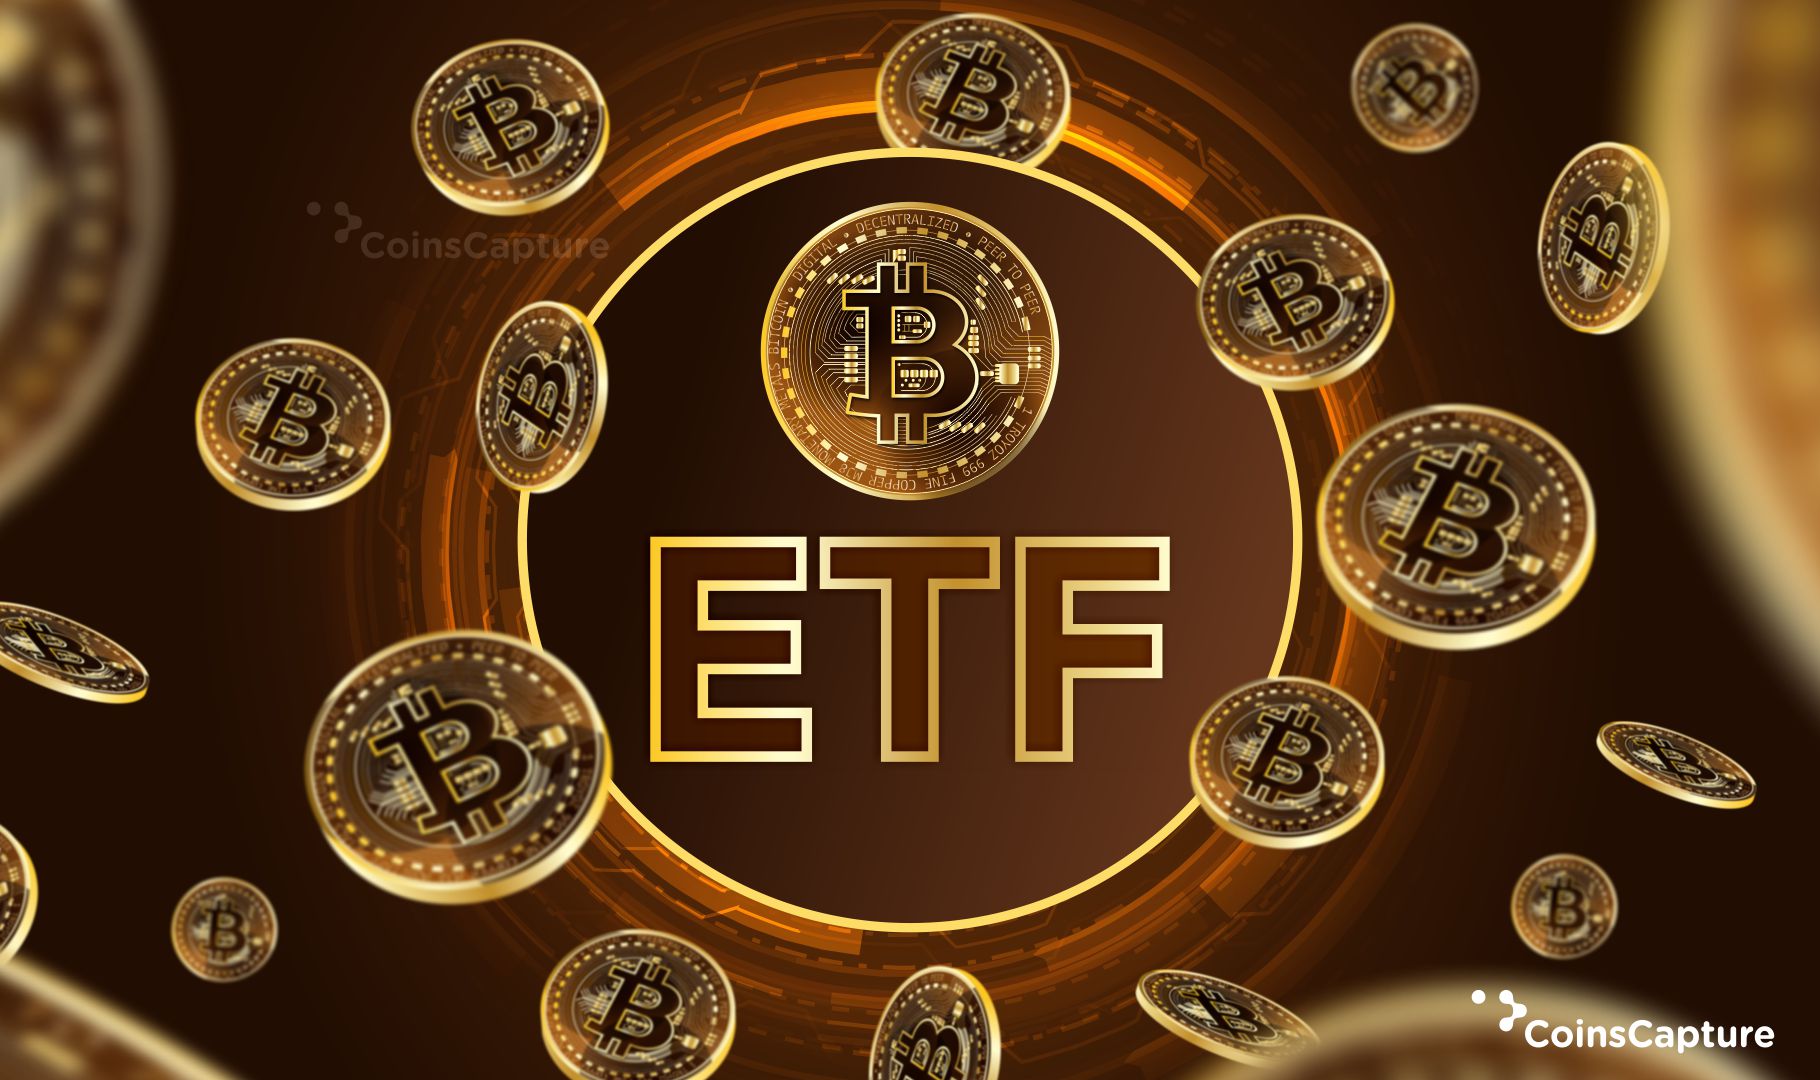 What Are Bitcoin ETFs?